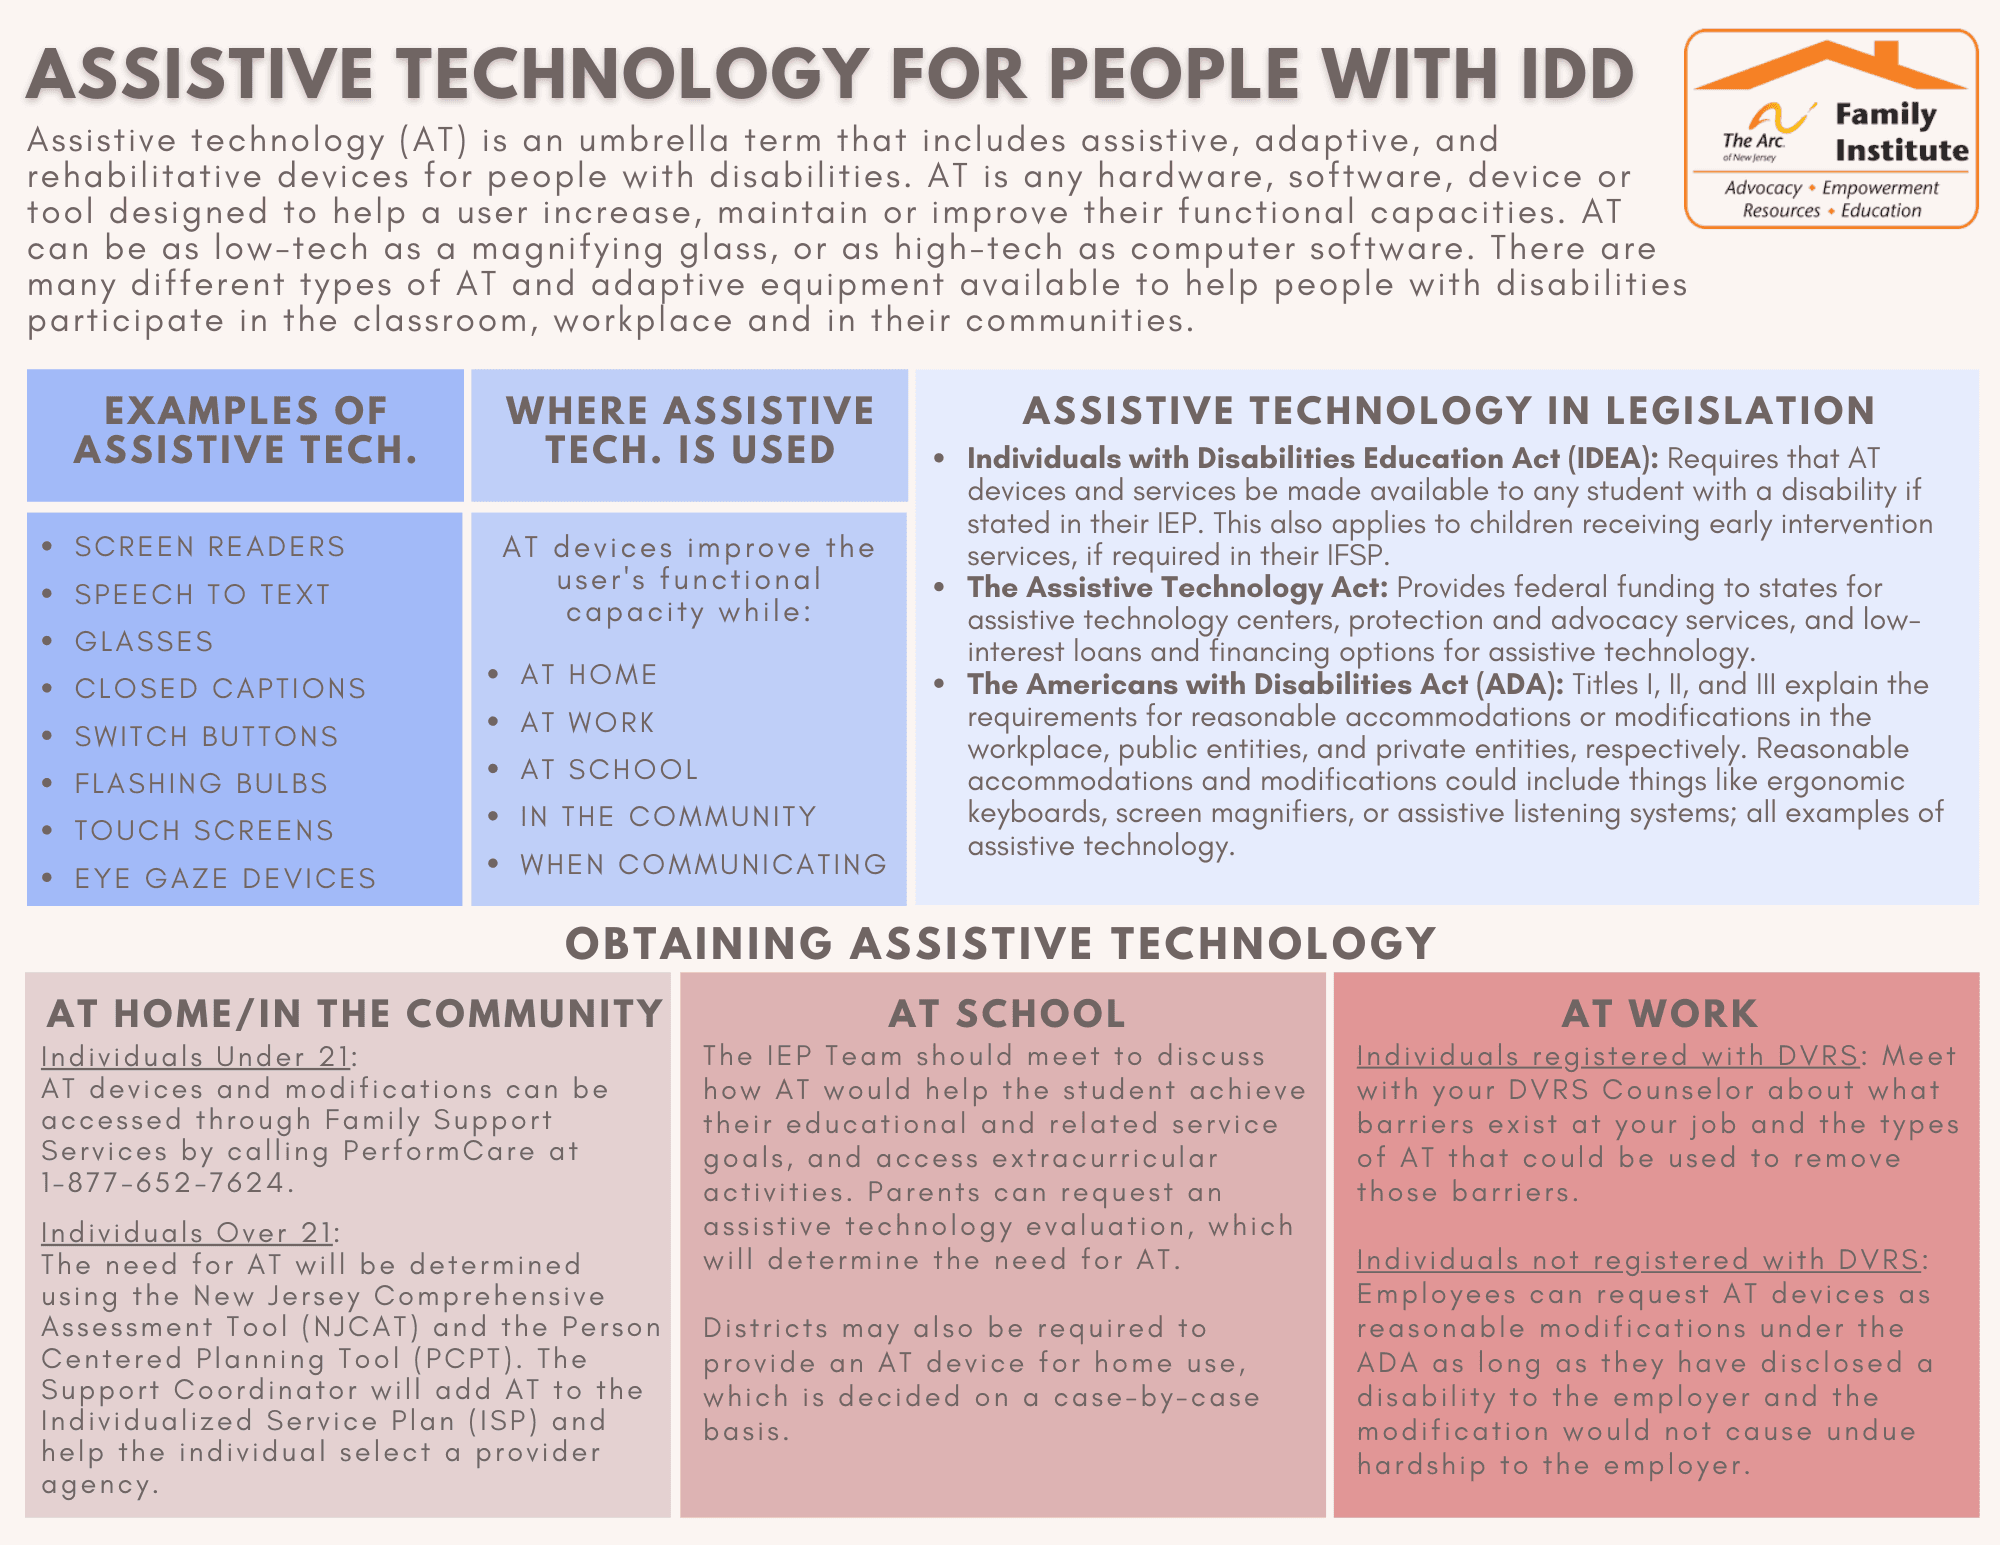 Assistive Technology Through the Division of Developmental Disabilities (DDD)